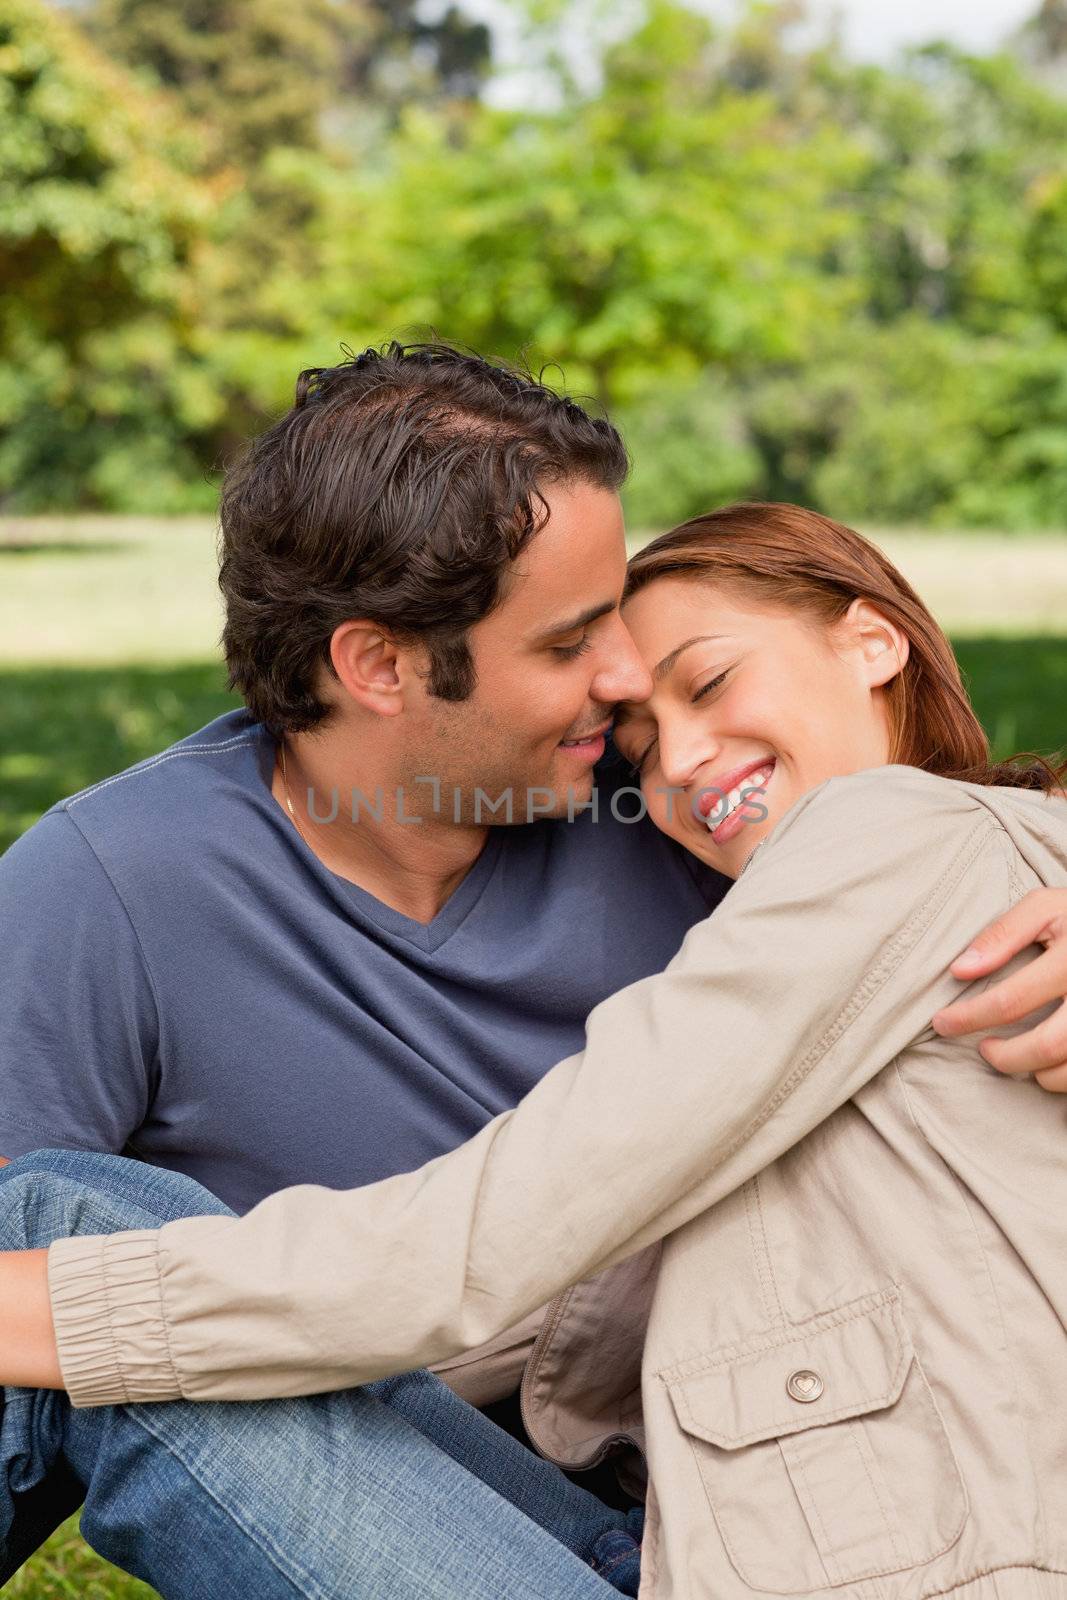 Man smiling as his friend rests her head on his shoulders by Wavebreakmedia